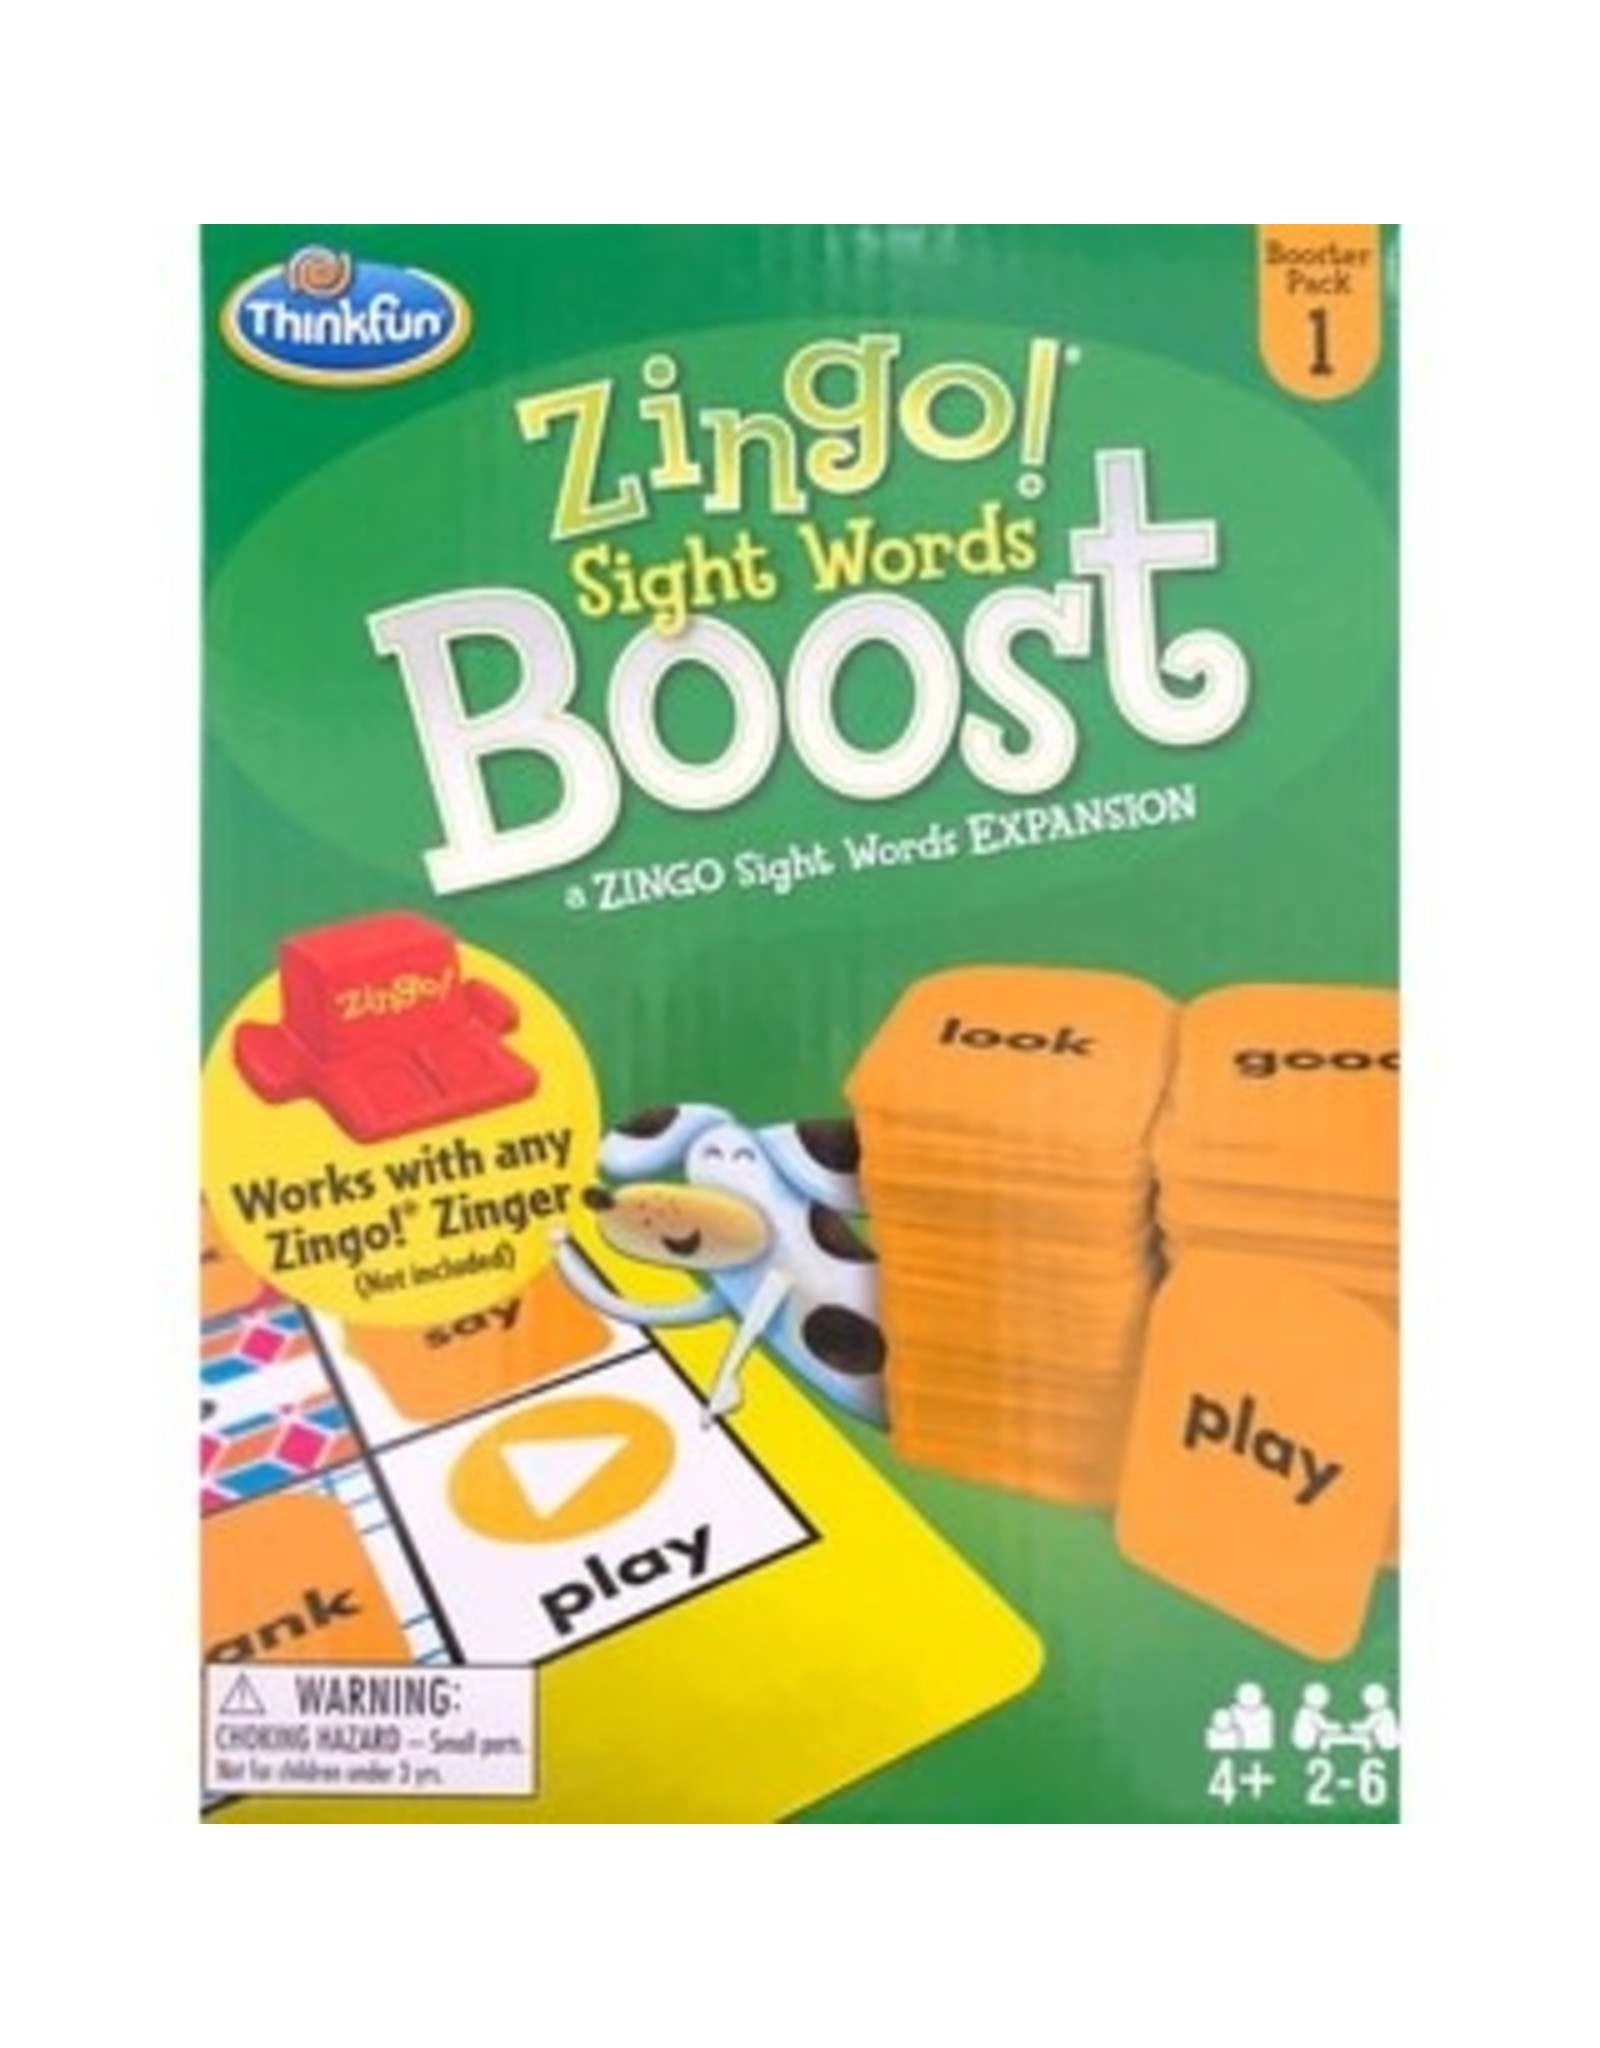 Think Fun Zingo! Sight Words Boost Booster Pack #1